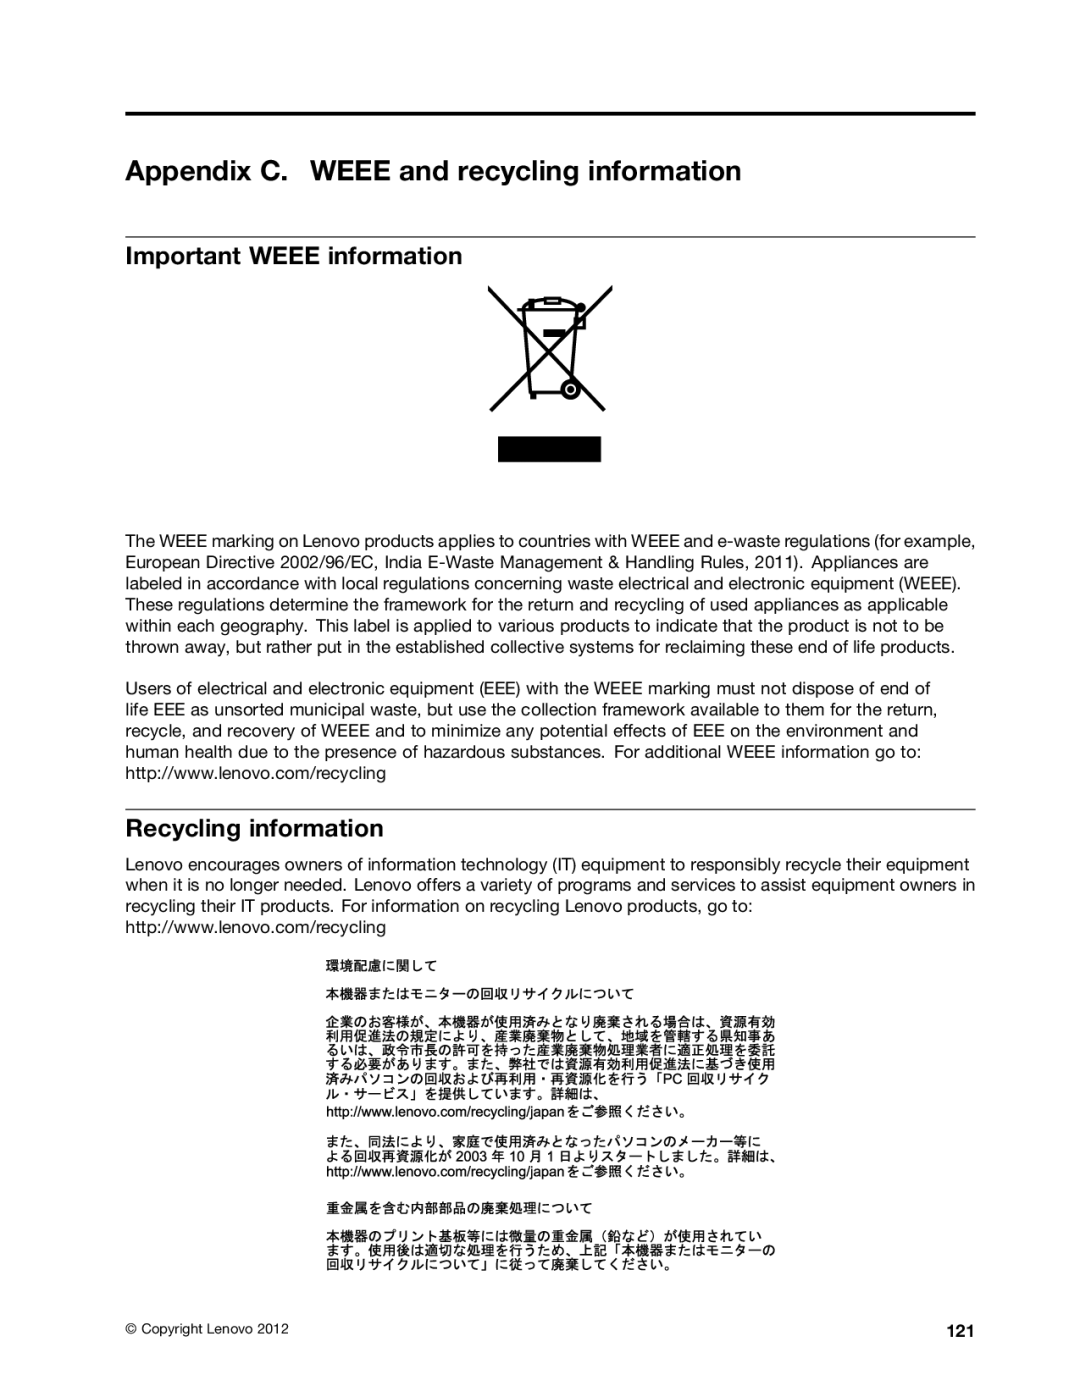 Lenovo 3493DFU, 3496 Appendix C. Weee and recycling information, Important Weee information, Recycling information, 121 